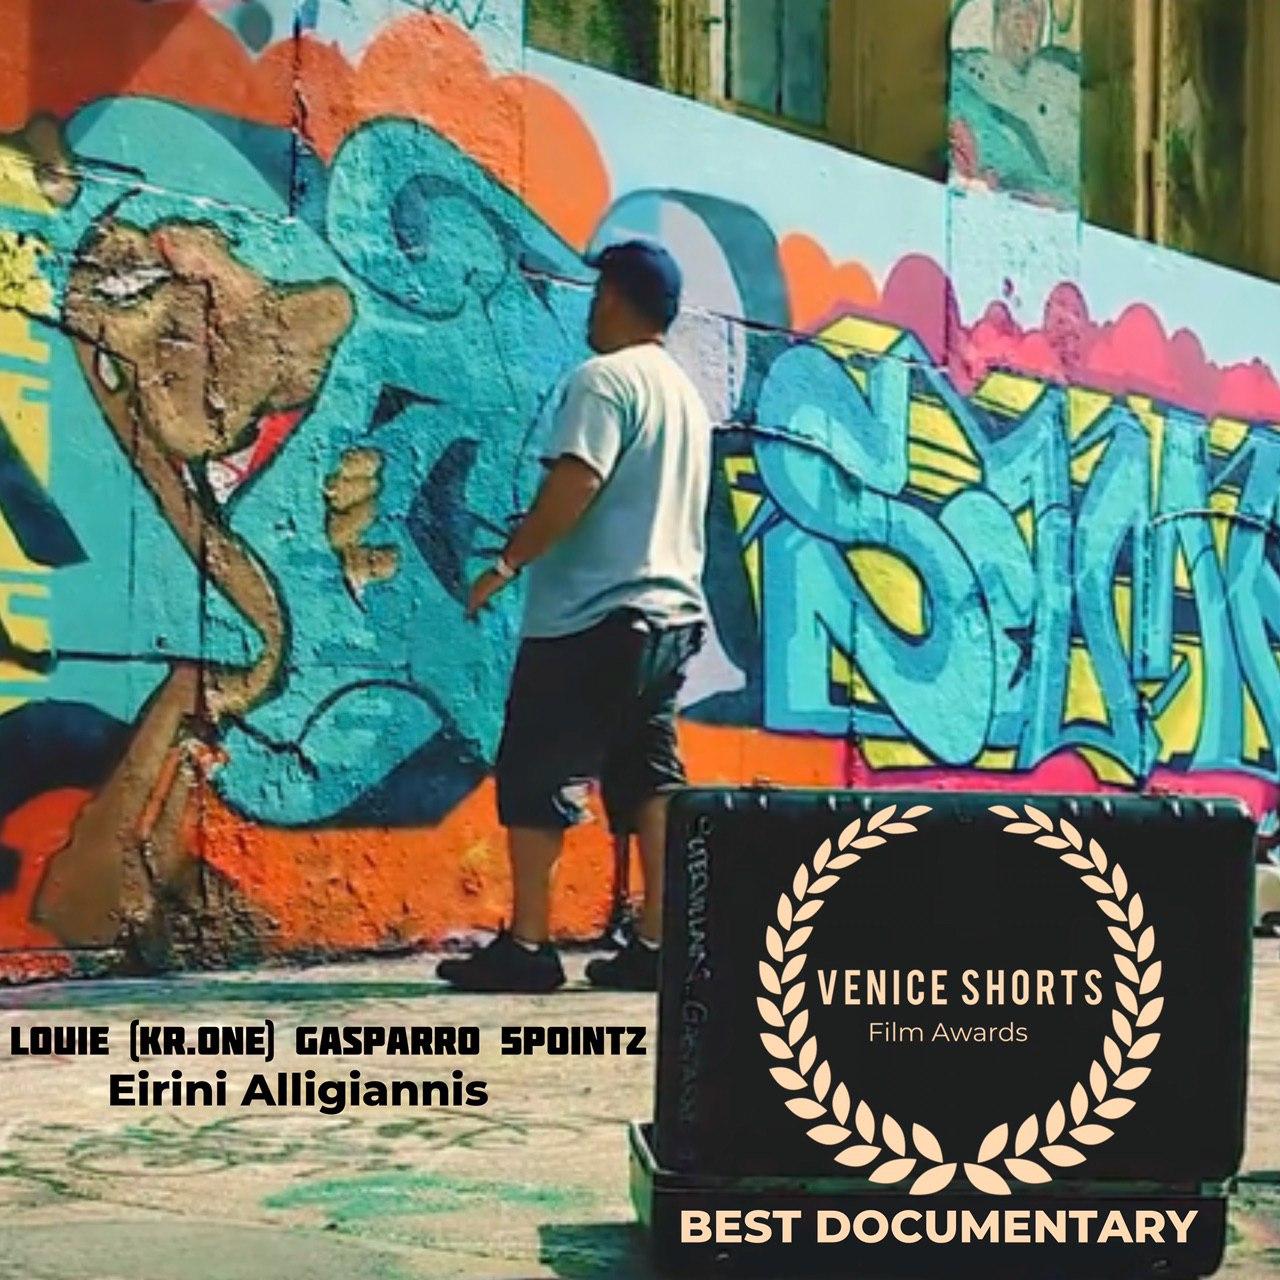 The winners of this edition of the Venice Short Film Awards are a great selection of amazing international talent in the world of independent film.